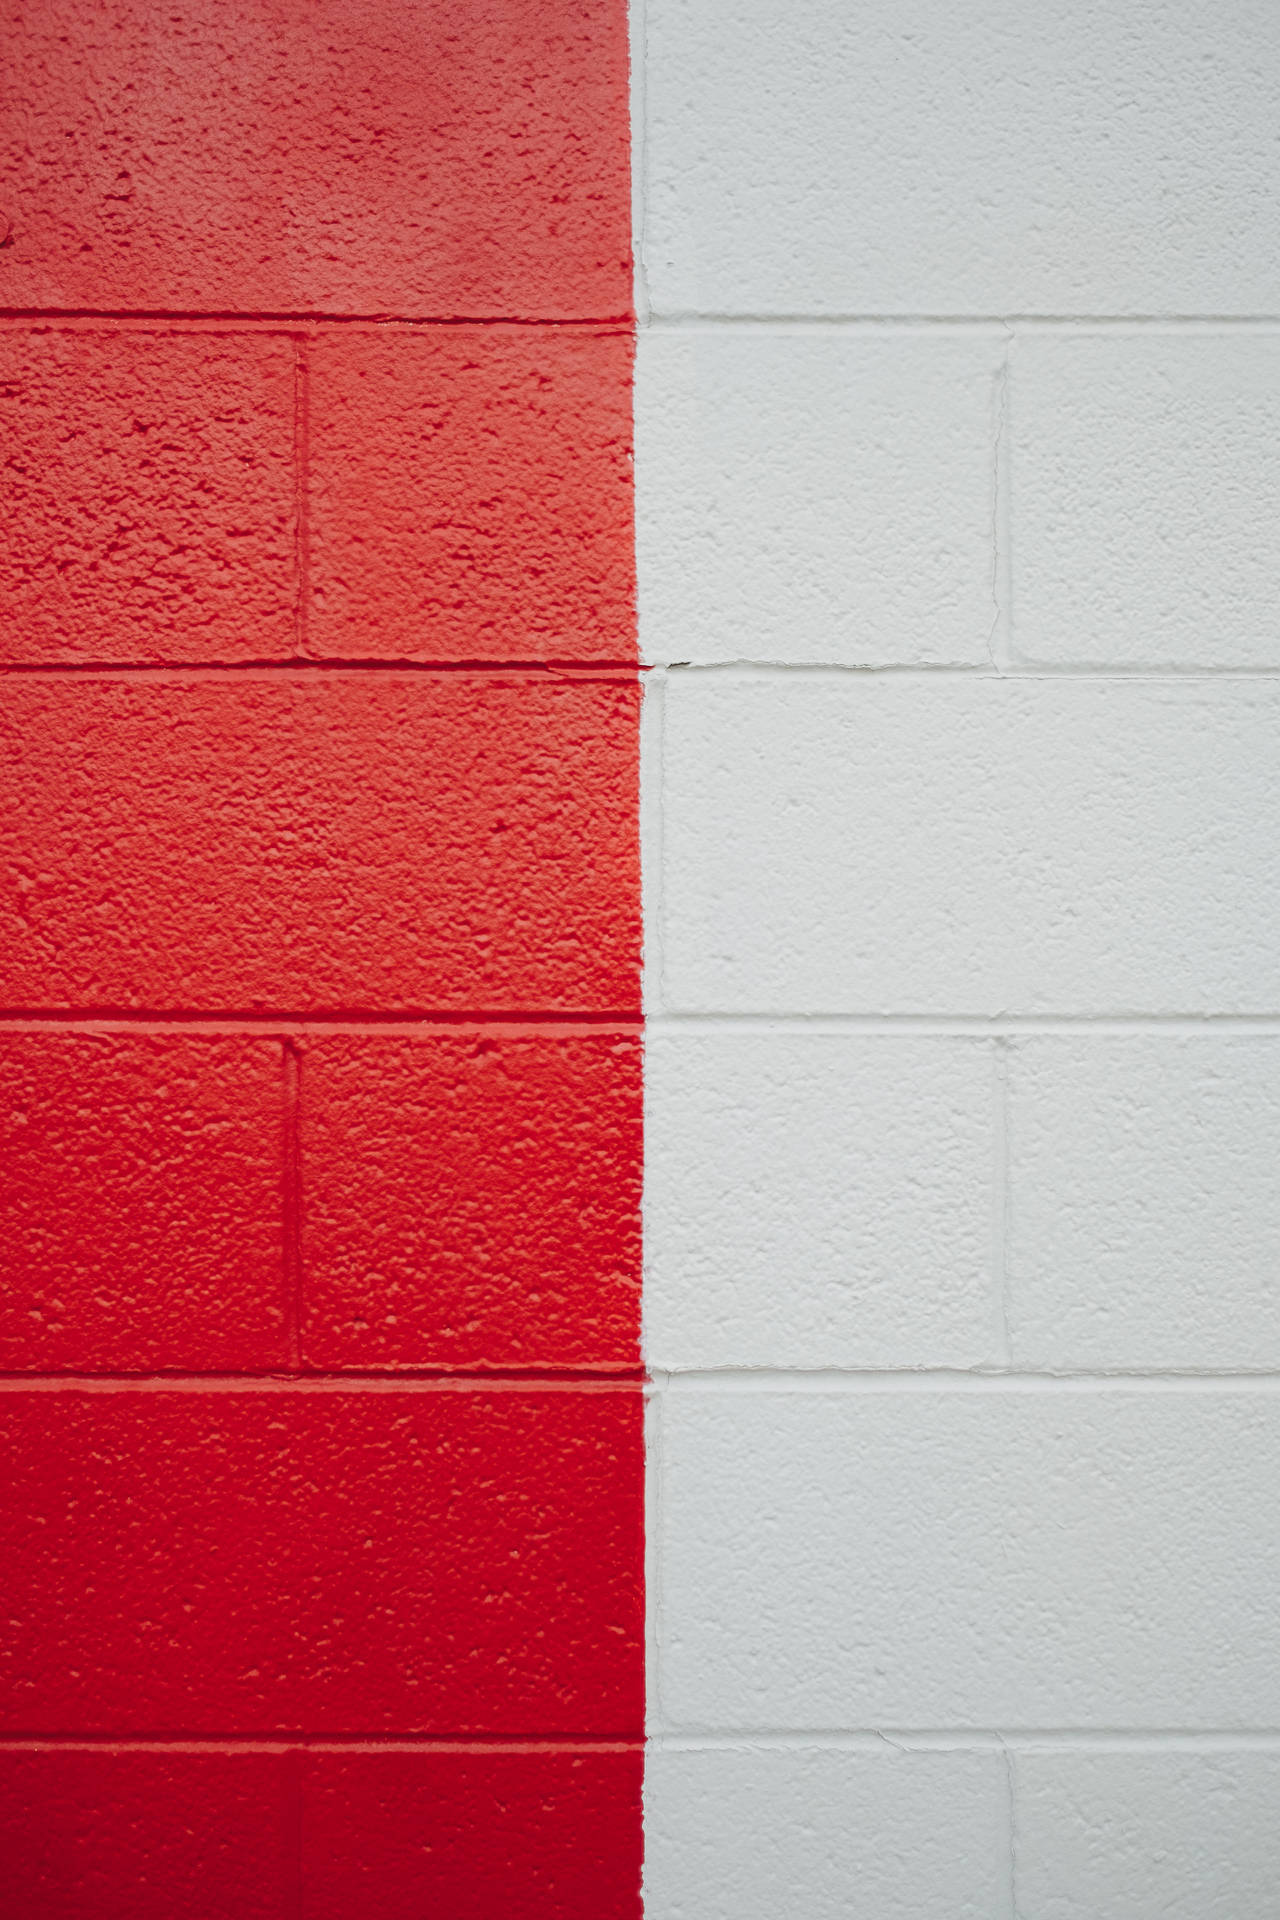 Red And White Wall Background